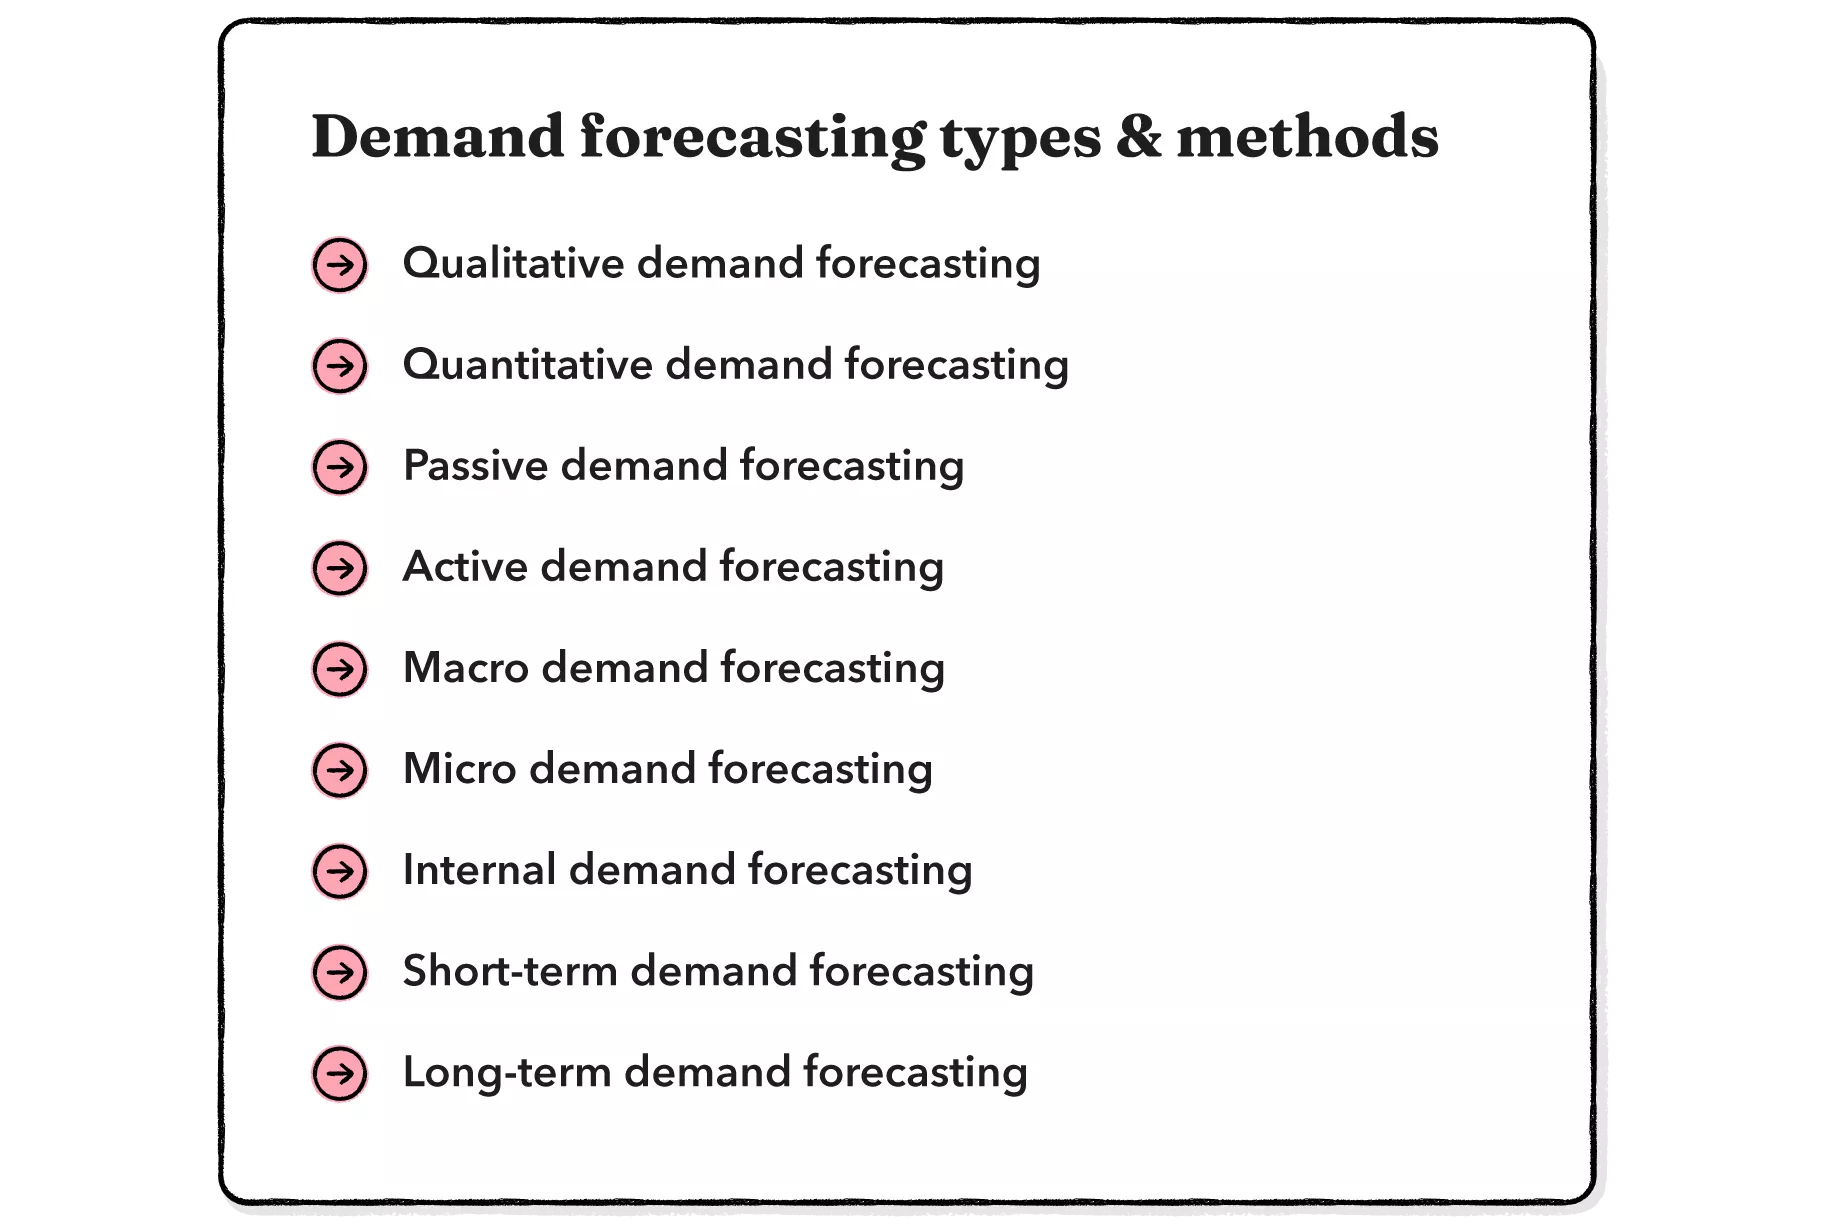 Demand forecasting methods and types